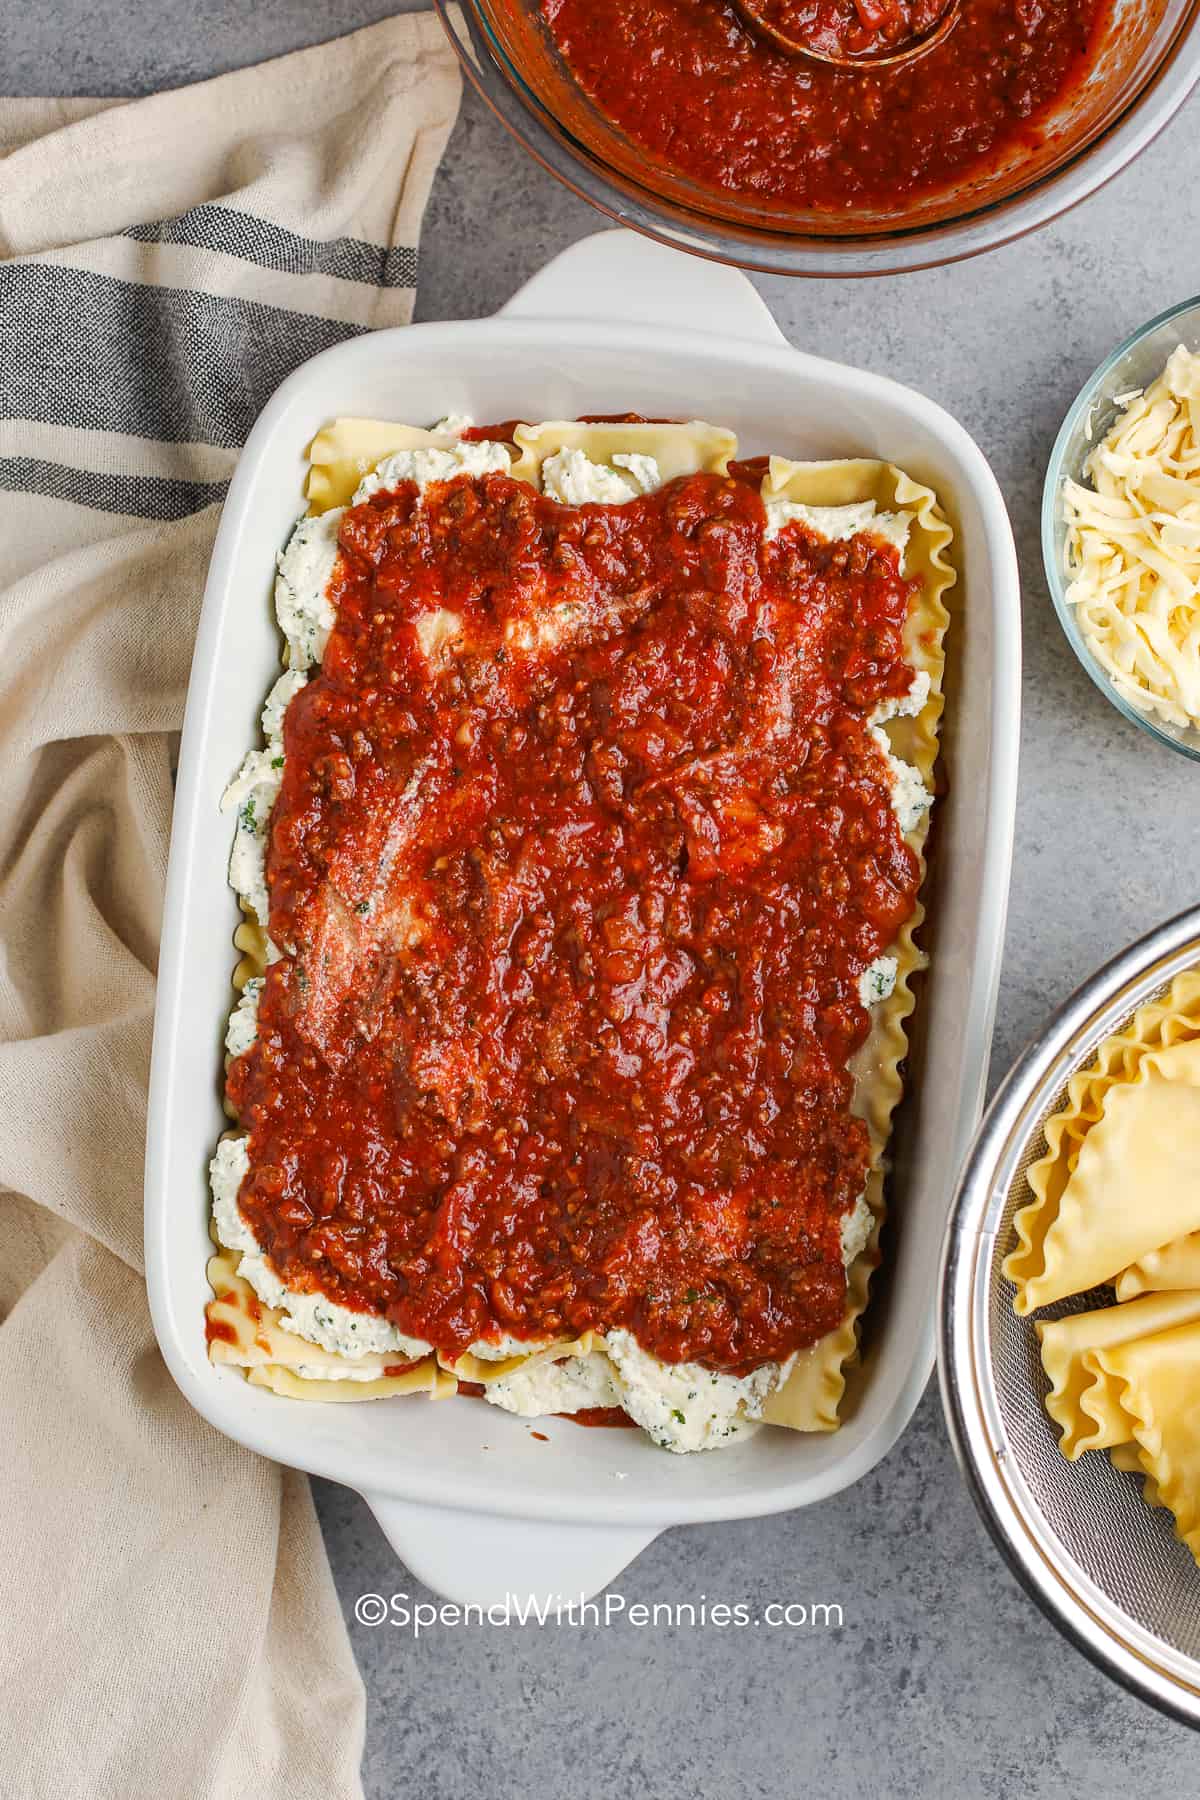 meat sauce spread over lasagna noodles with ricotta cheese